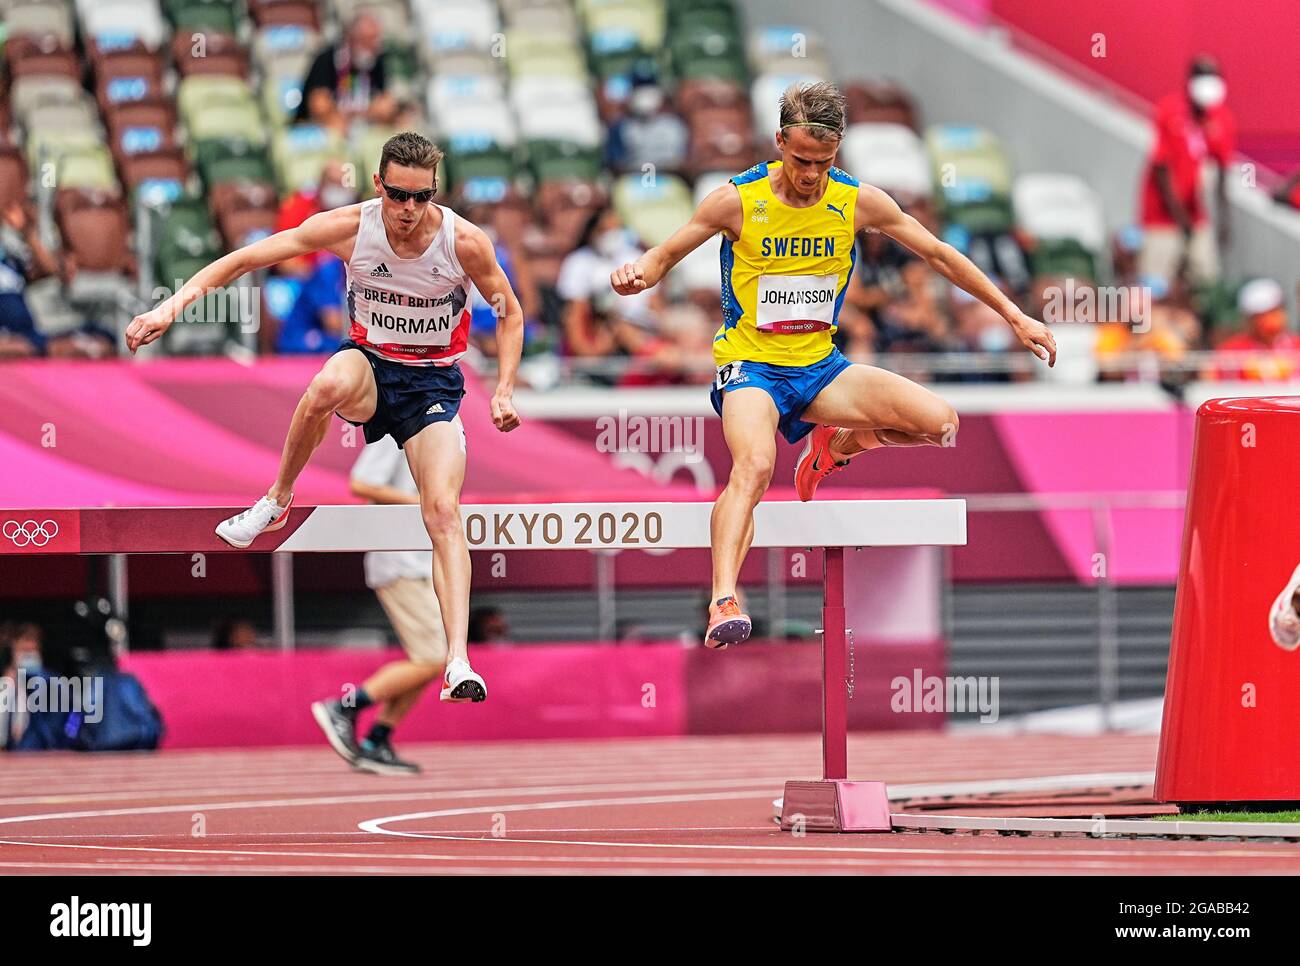 Tokyo, Japan. July 30, 2021: Vidar Johnsson from Sweden during 3000 meter steeplechase for women at the Tokyo Olympics, Tokyo Olympic stadium, Tokyo, Japan. Kim Price/CSM Credit: Cal Sport Media/Alamy Live News Stock Photo